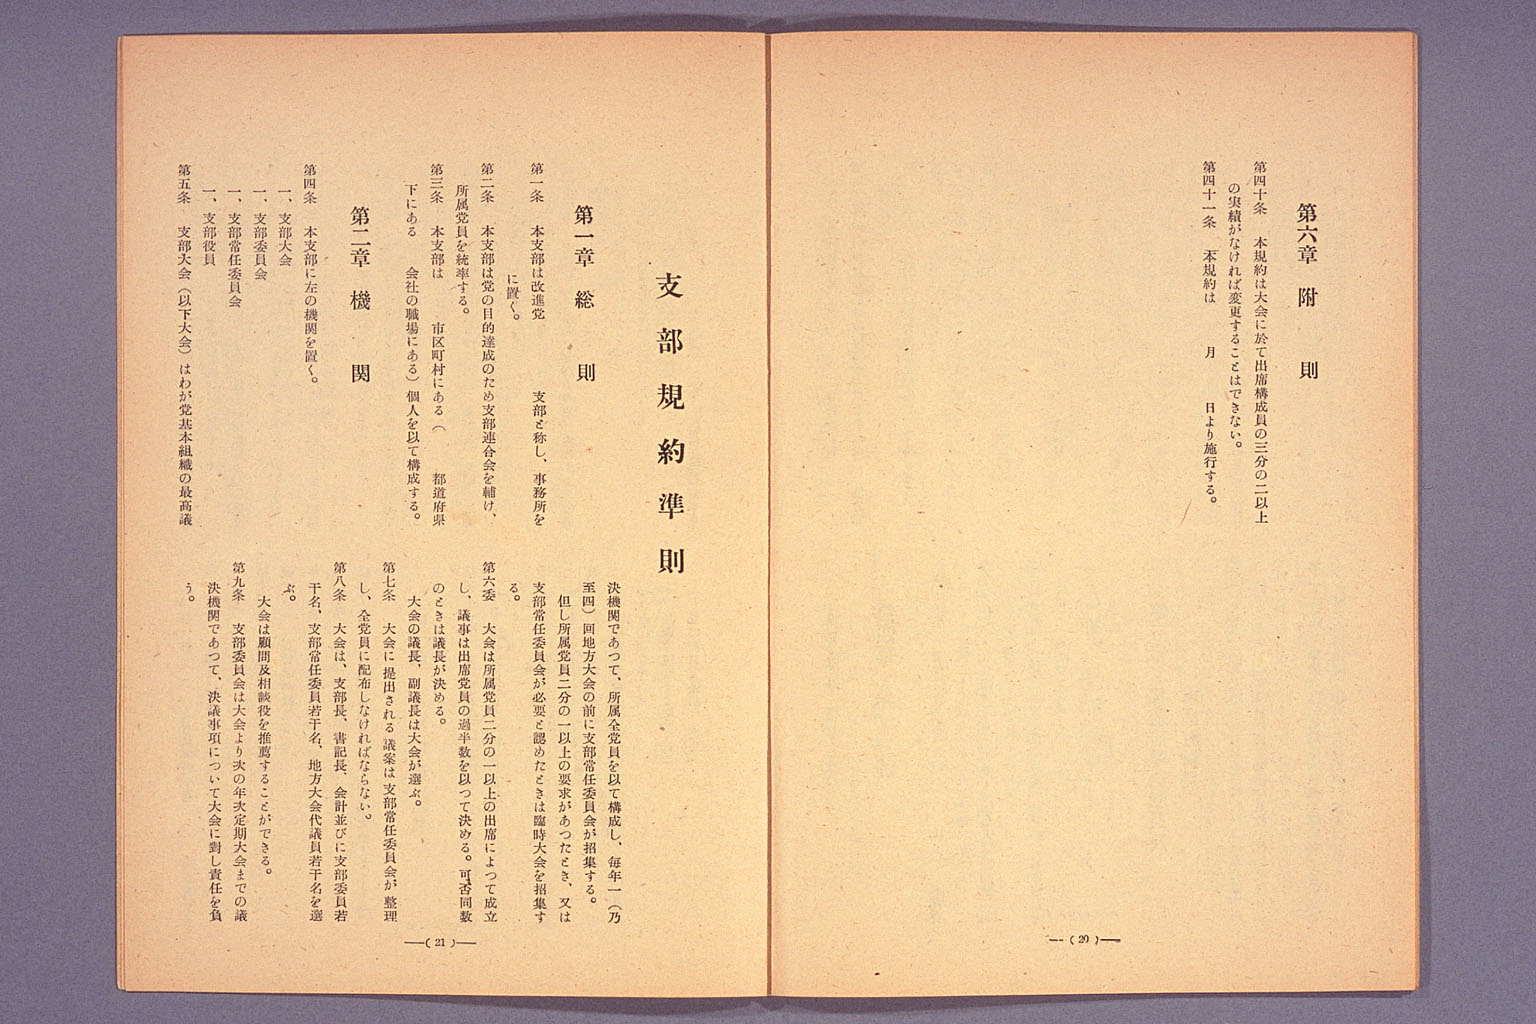 Platform of Japan Reform Party, declaration, release of policy guidelines, and others (larger)